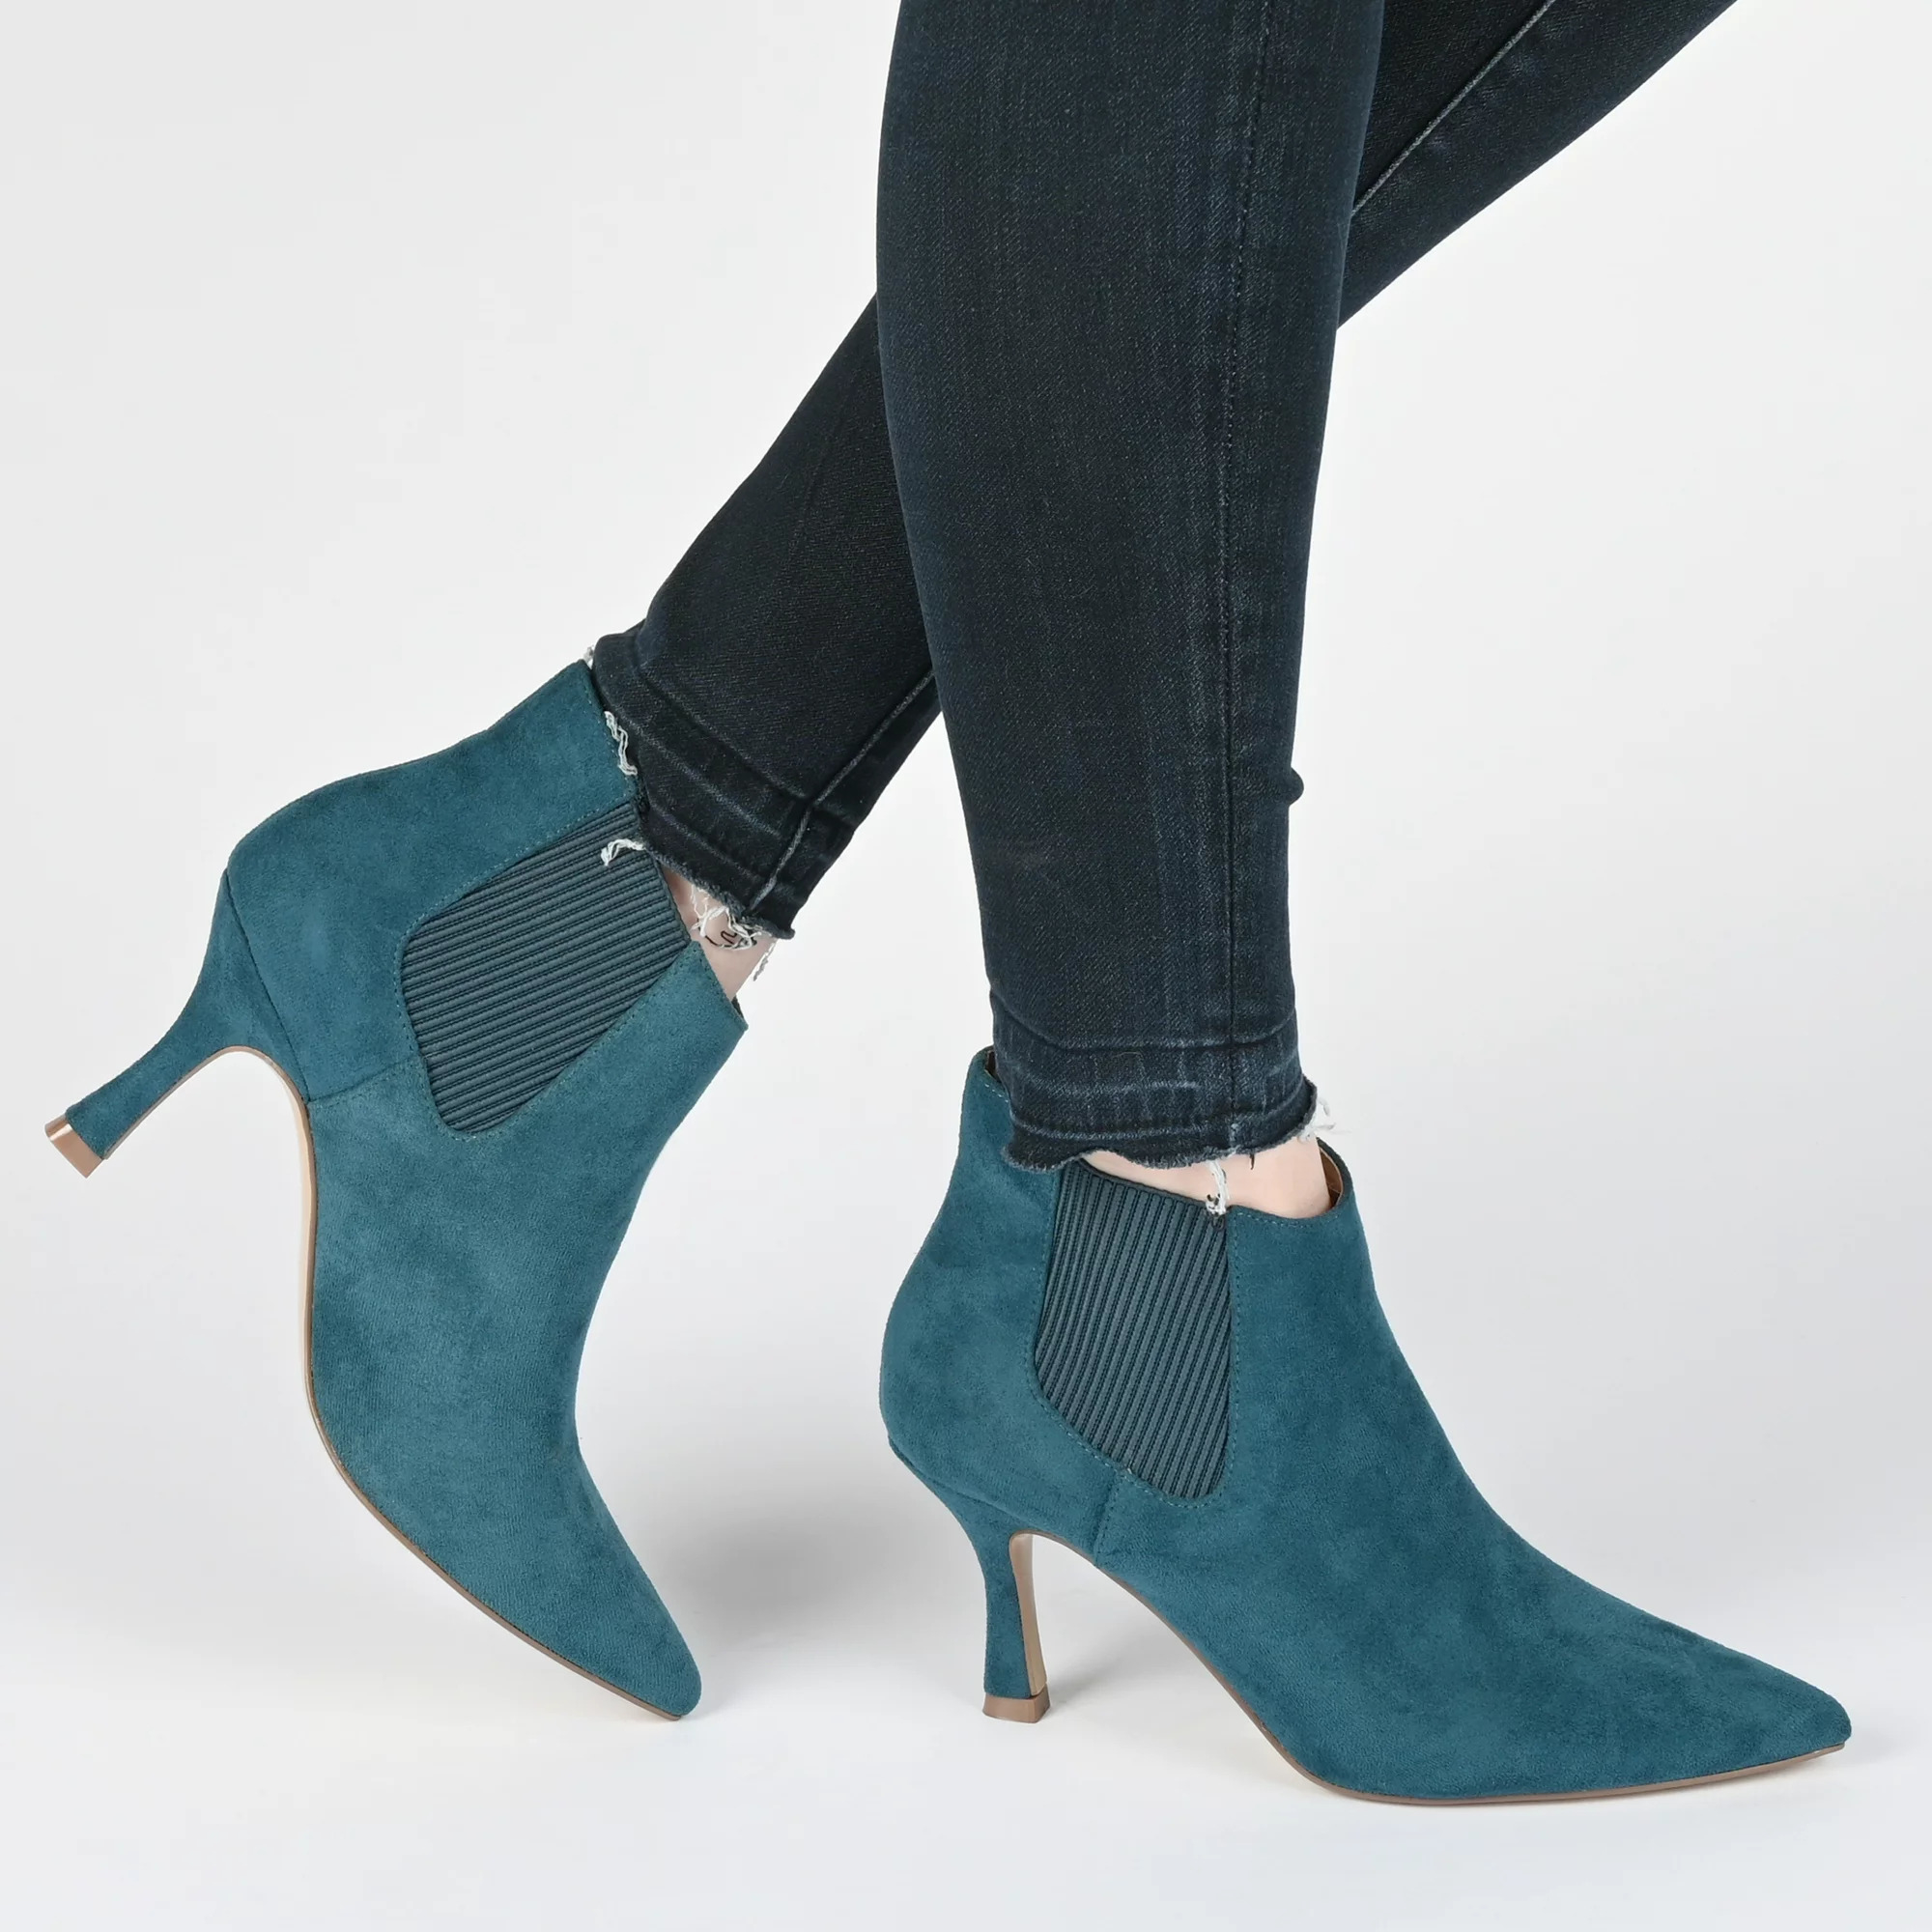 A model wearing the boots in teal